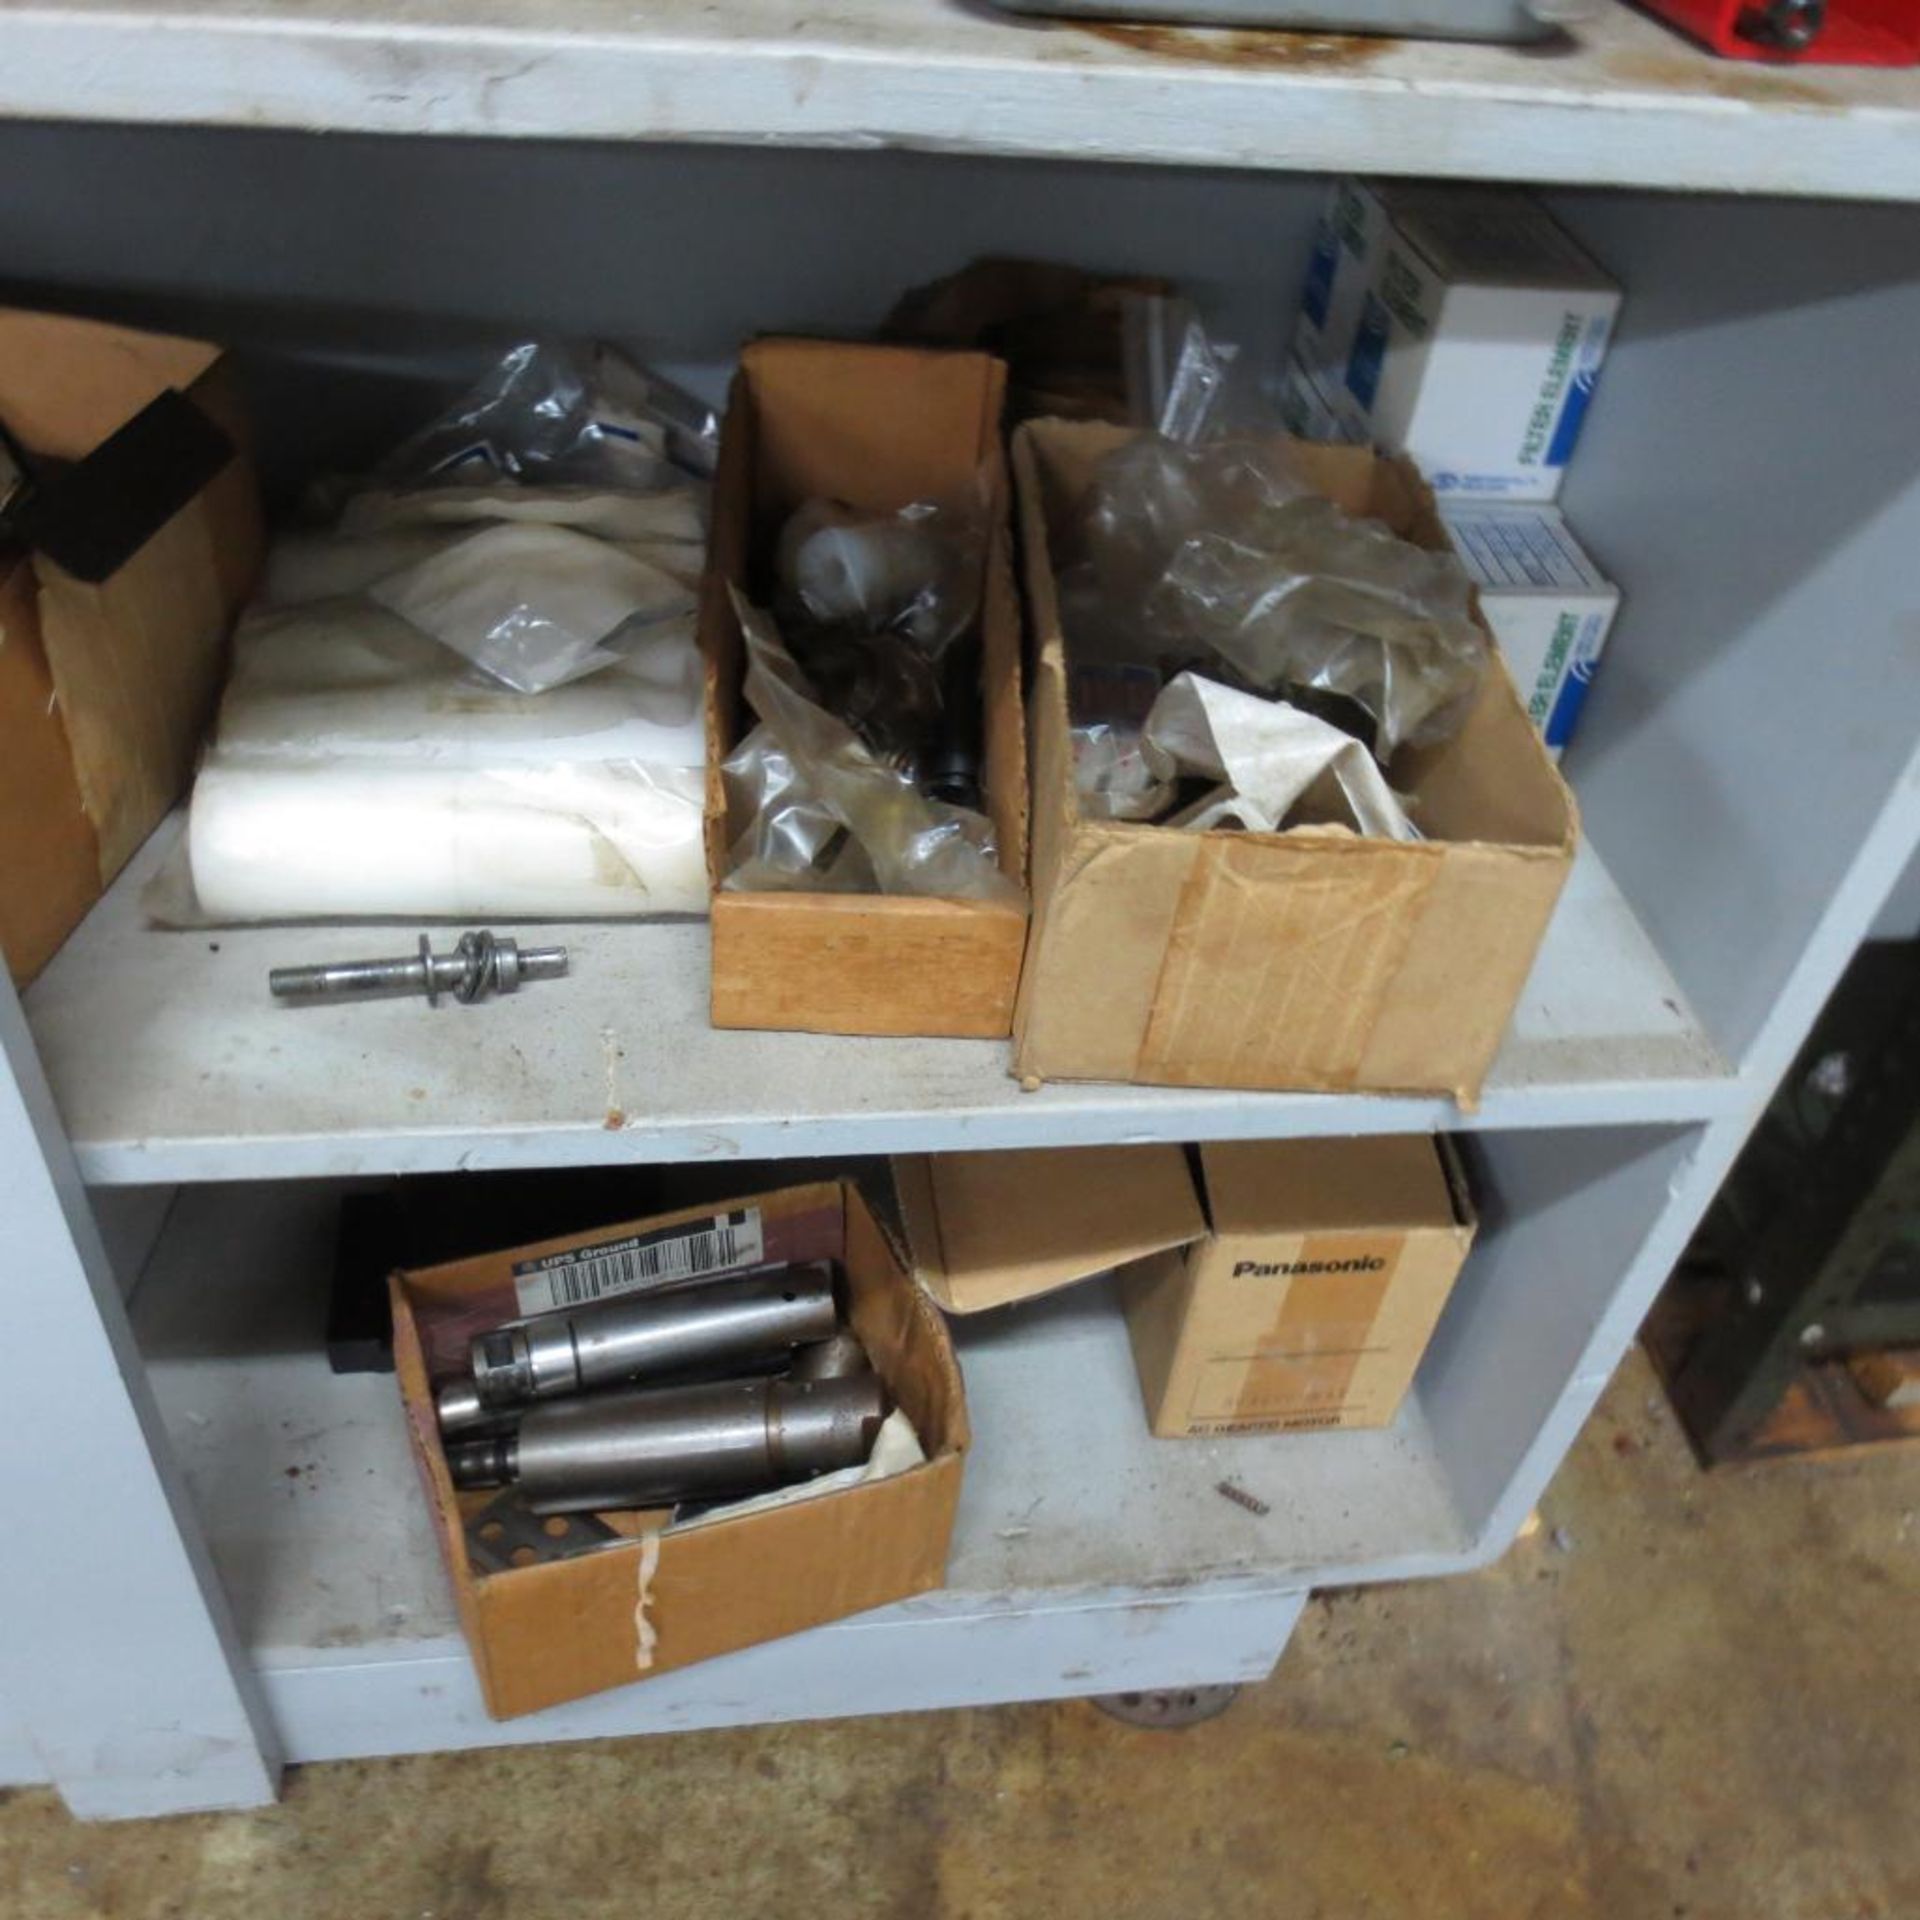 Assorted BNE 34 / 51 Parts and Supply's and Bar Feed Fedek Parts - Image 7 of 8